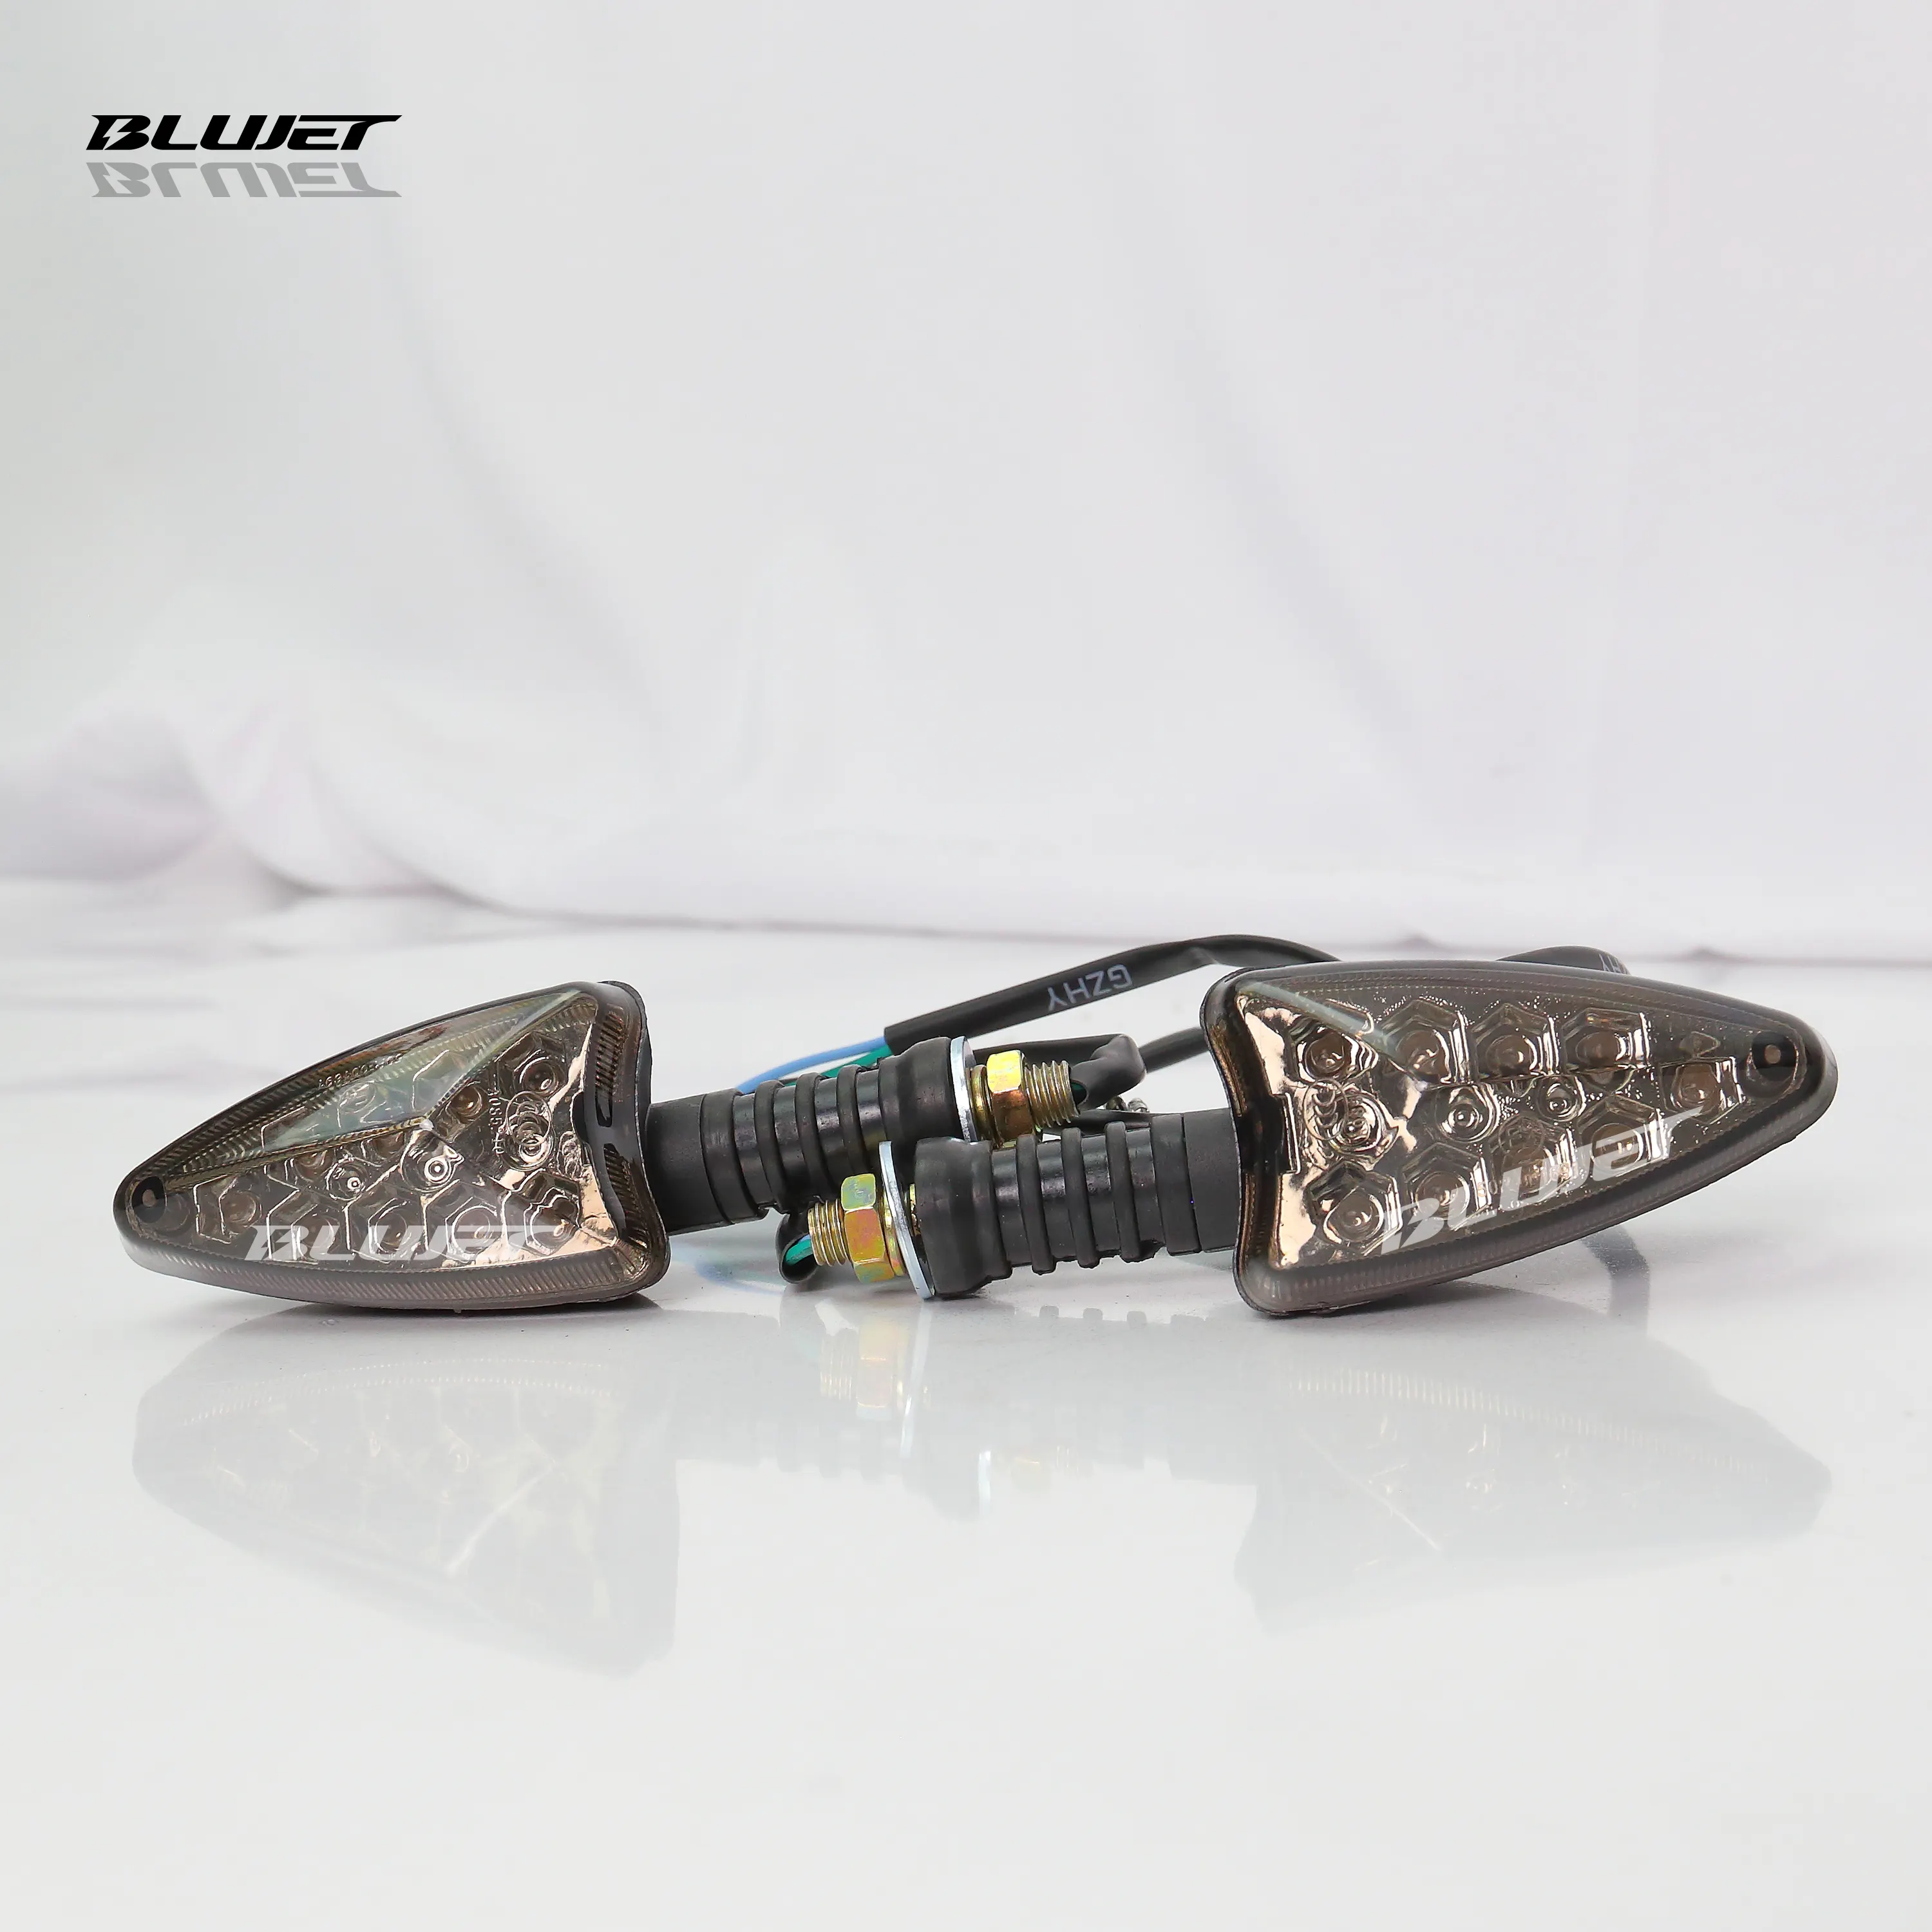 Mmotorcycle LED Waterproof headlight for various motorcycle types other motorcycle parts other motorcycle body systems